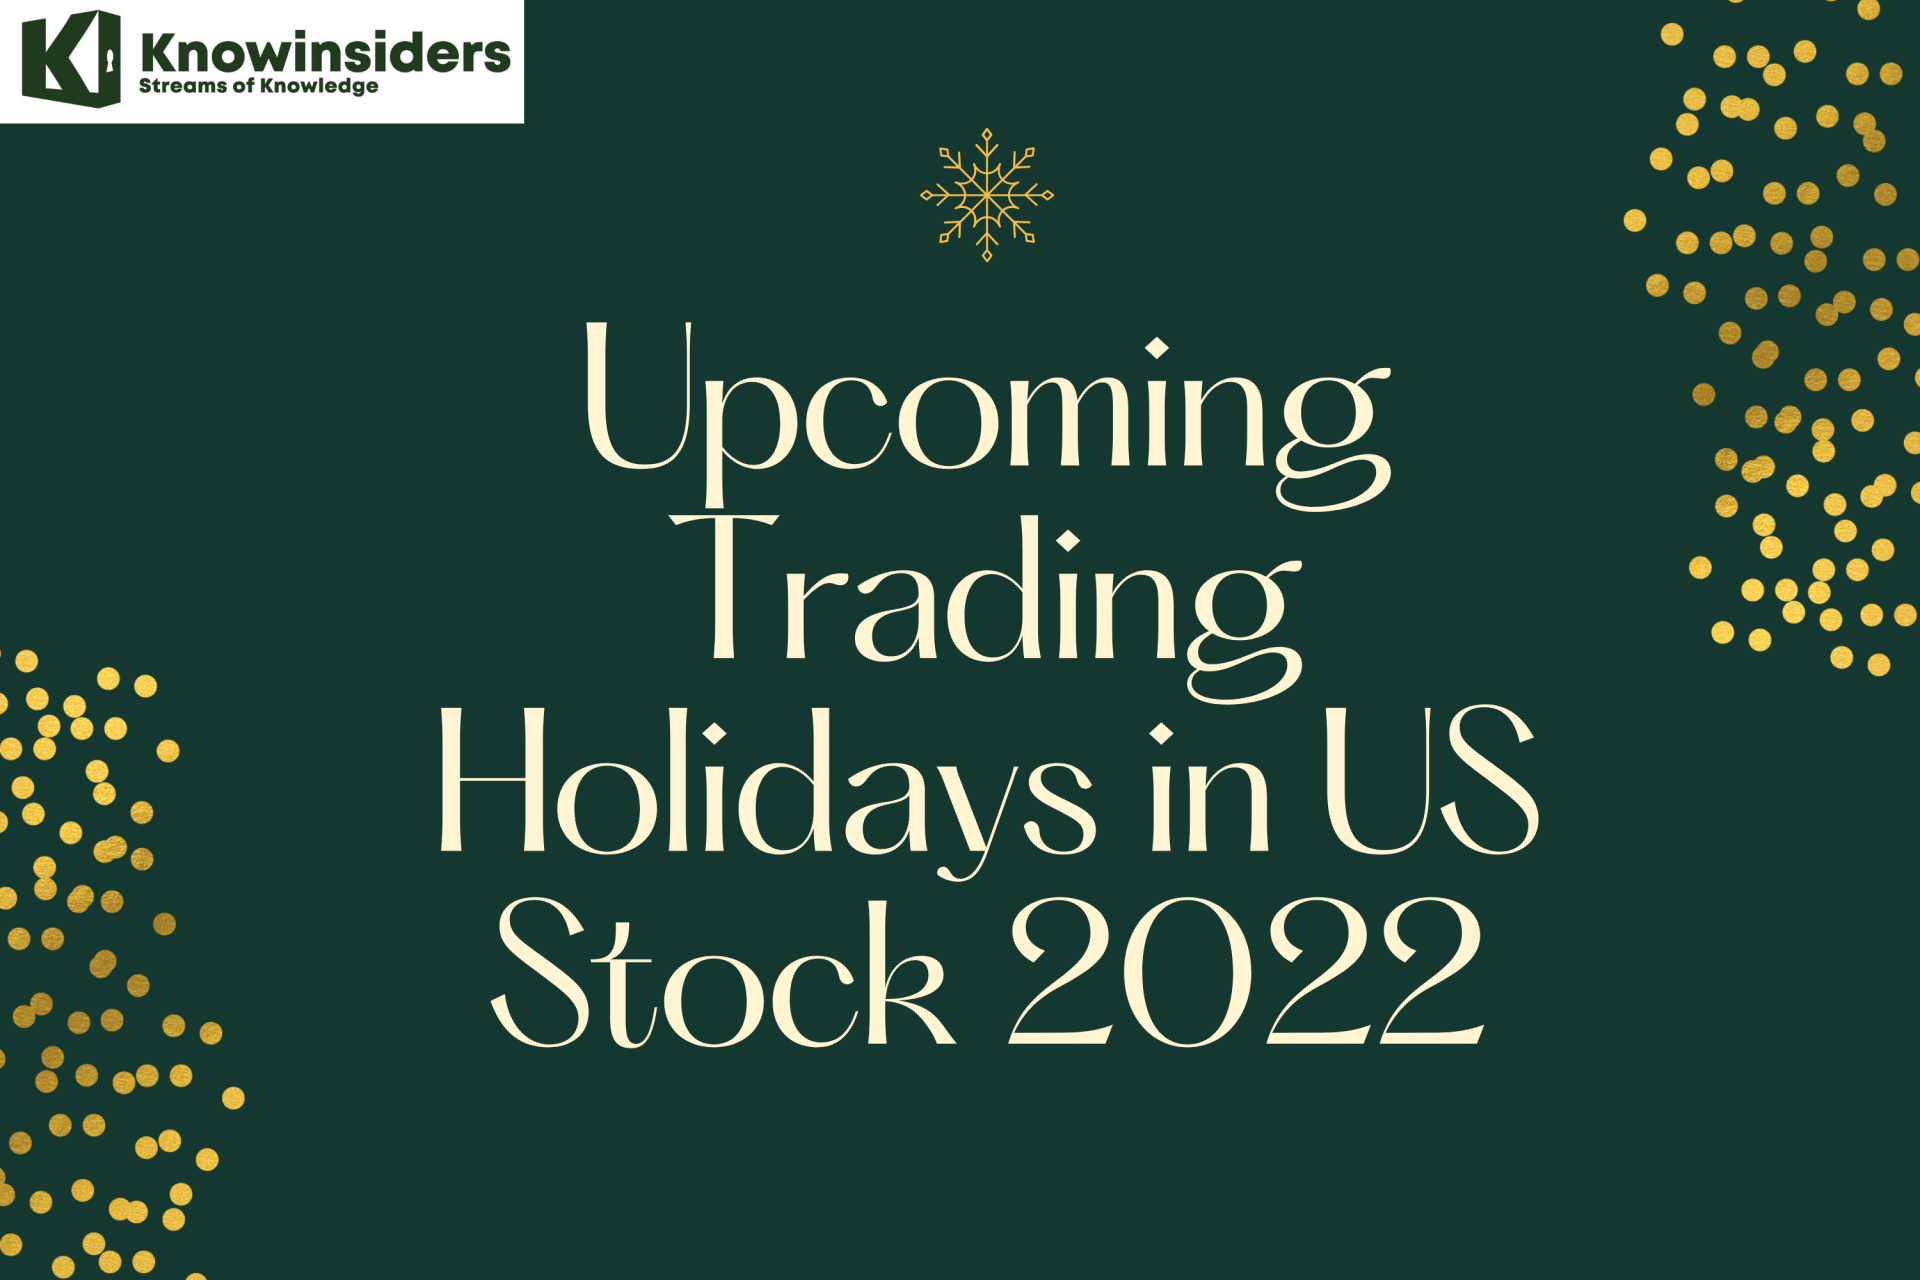 Upcoming Trading Holidays in US Stock 2022